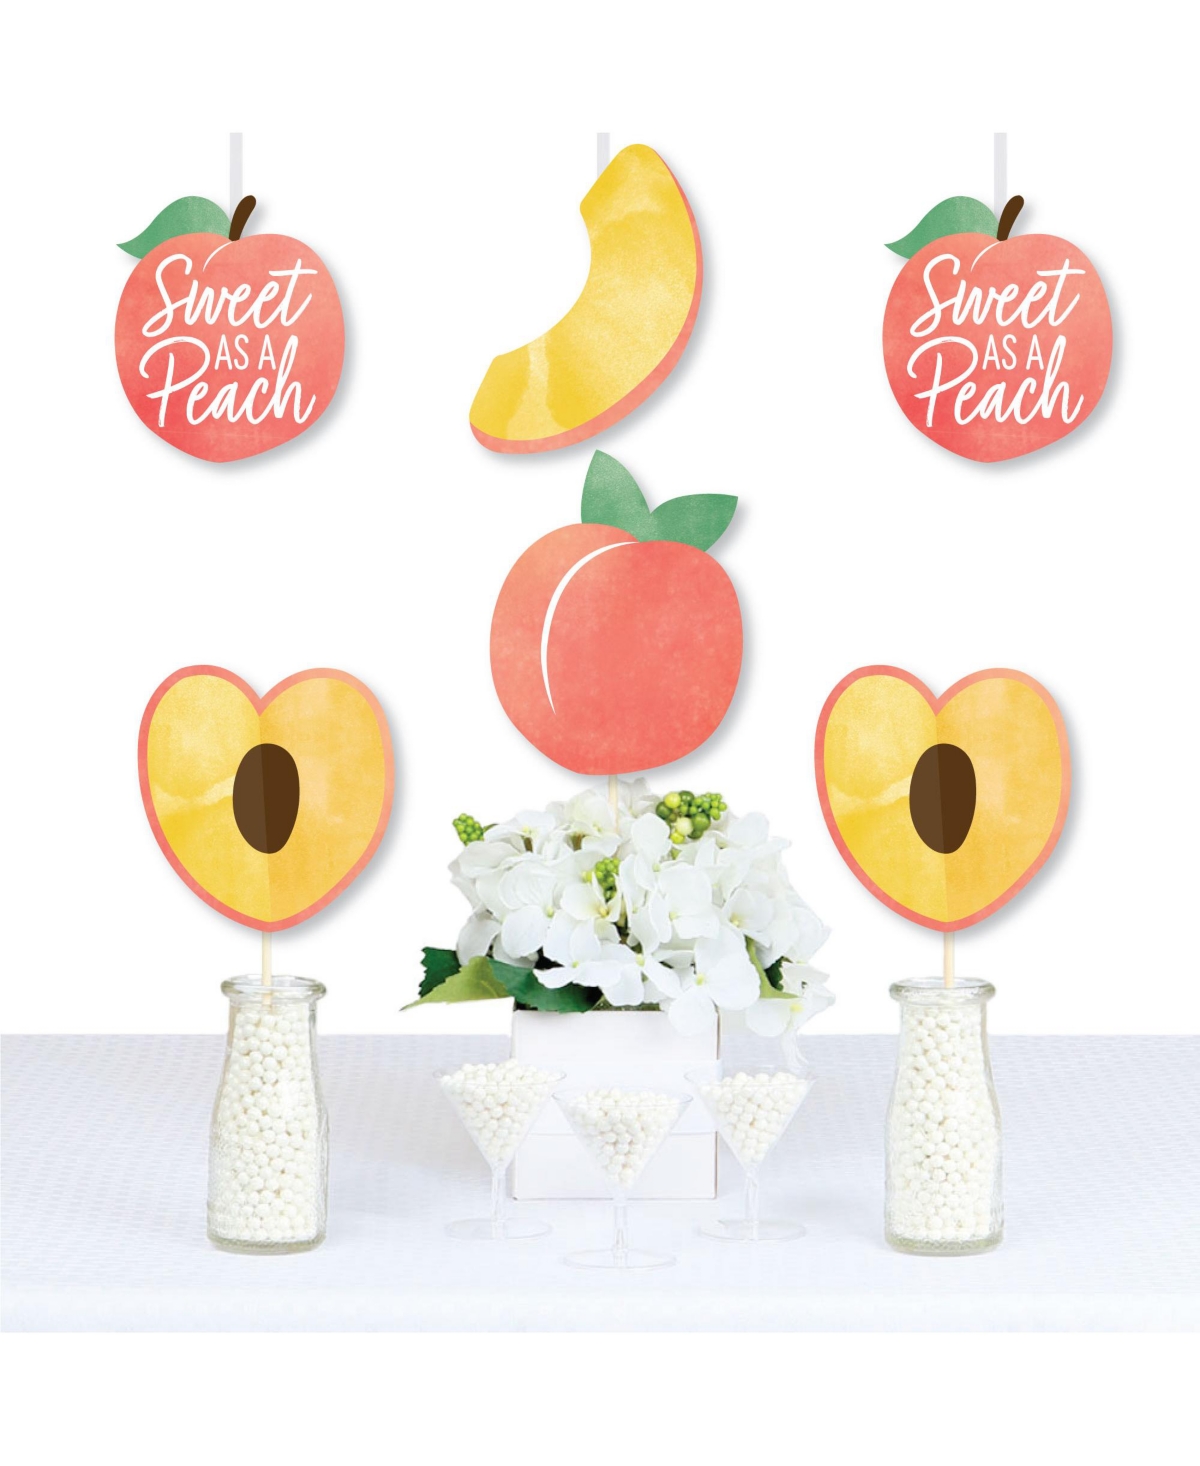 Sweet as a Peach - Fruit Themed Baby Shower or Birthday Party Essentials - 20 Ct